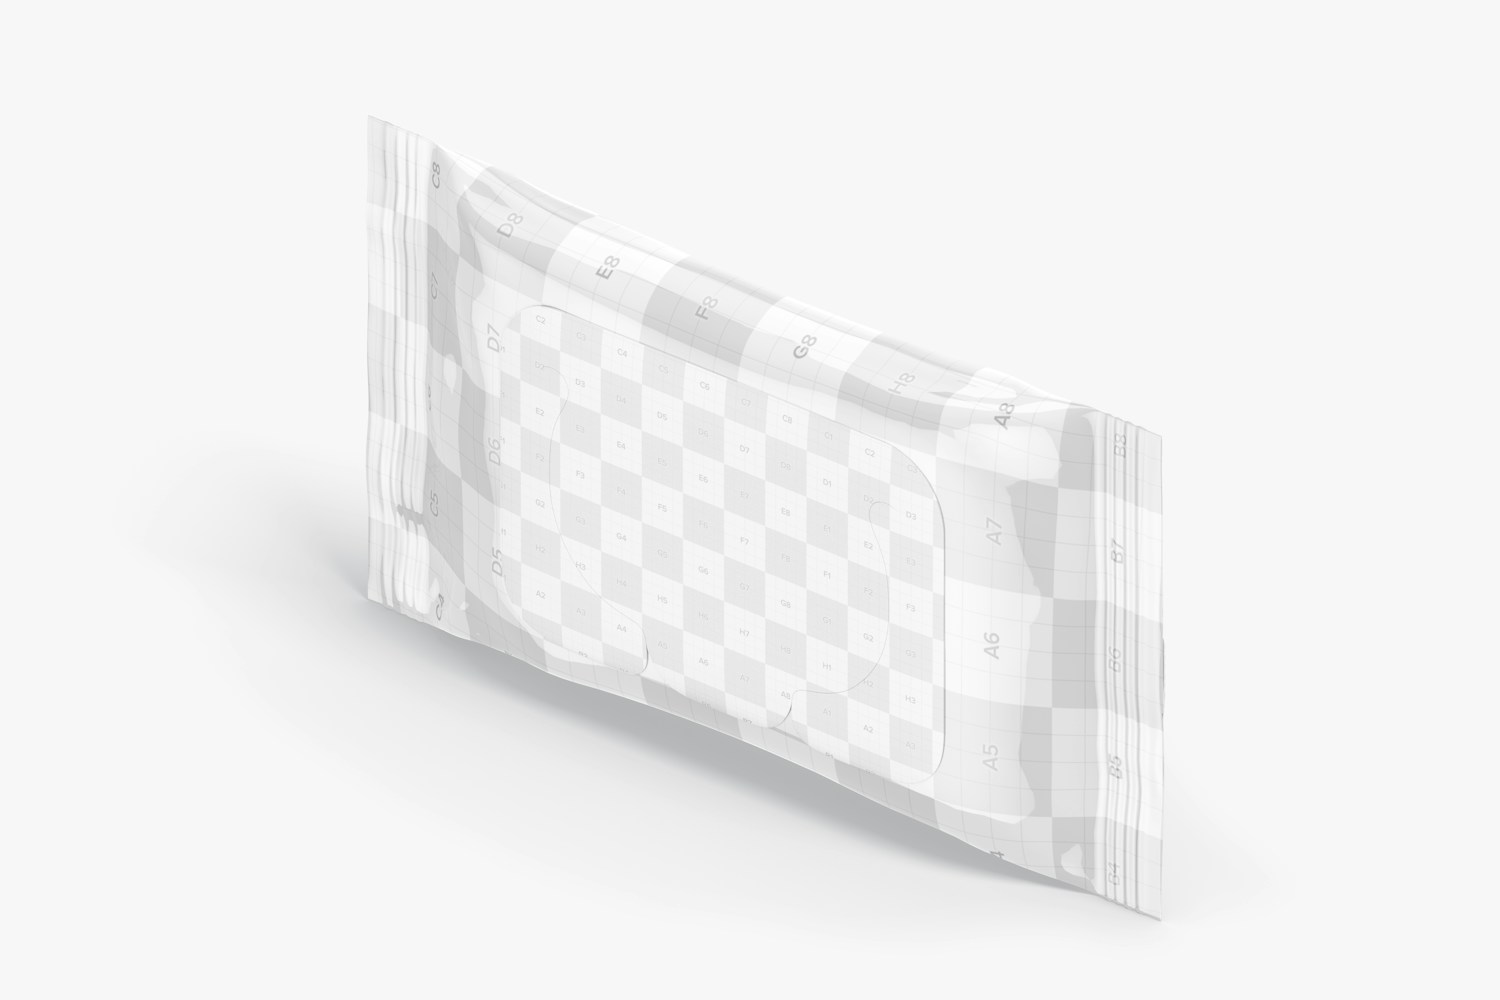 Wipes Pack Mockup, Standing